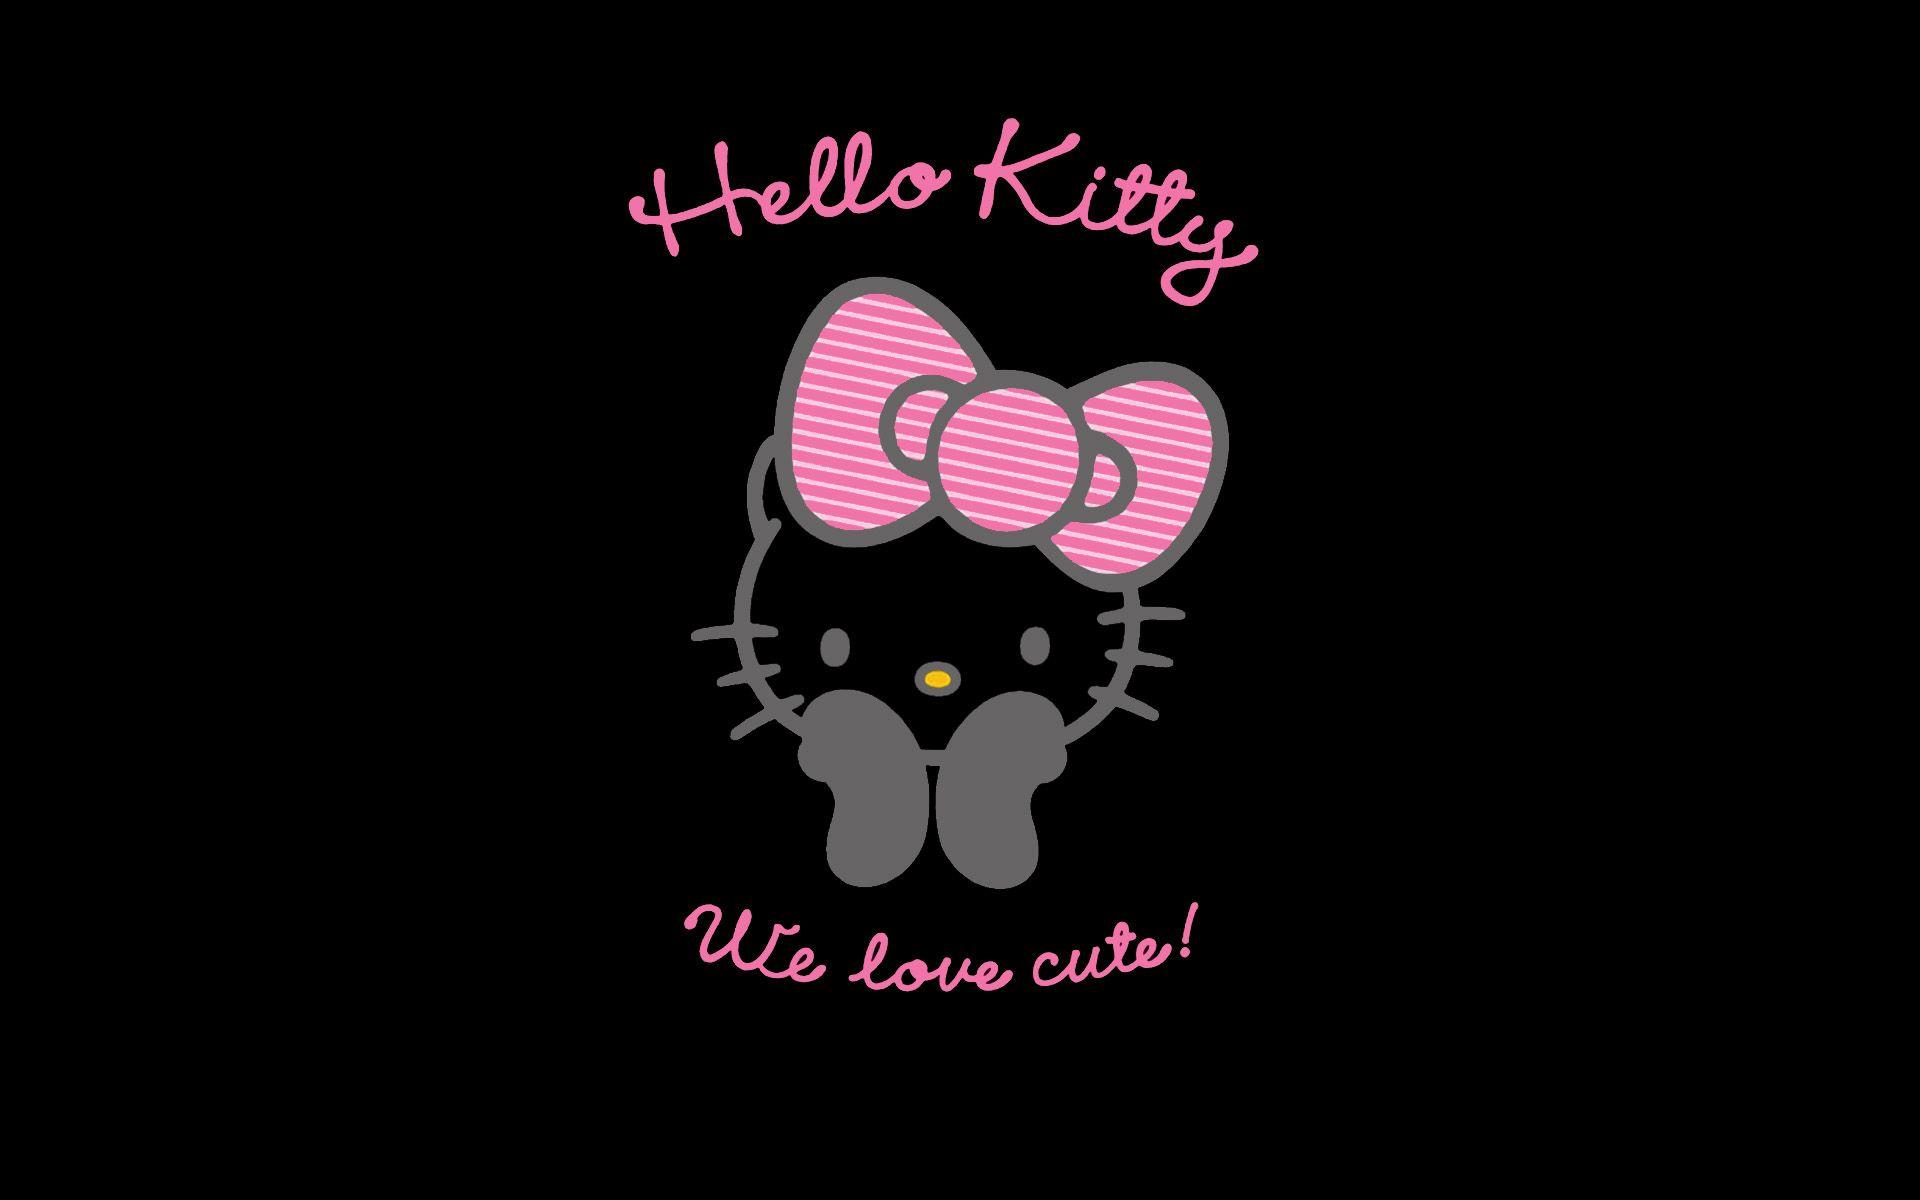 hello kitty wallpapers hd wallpapers inn a· download